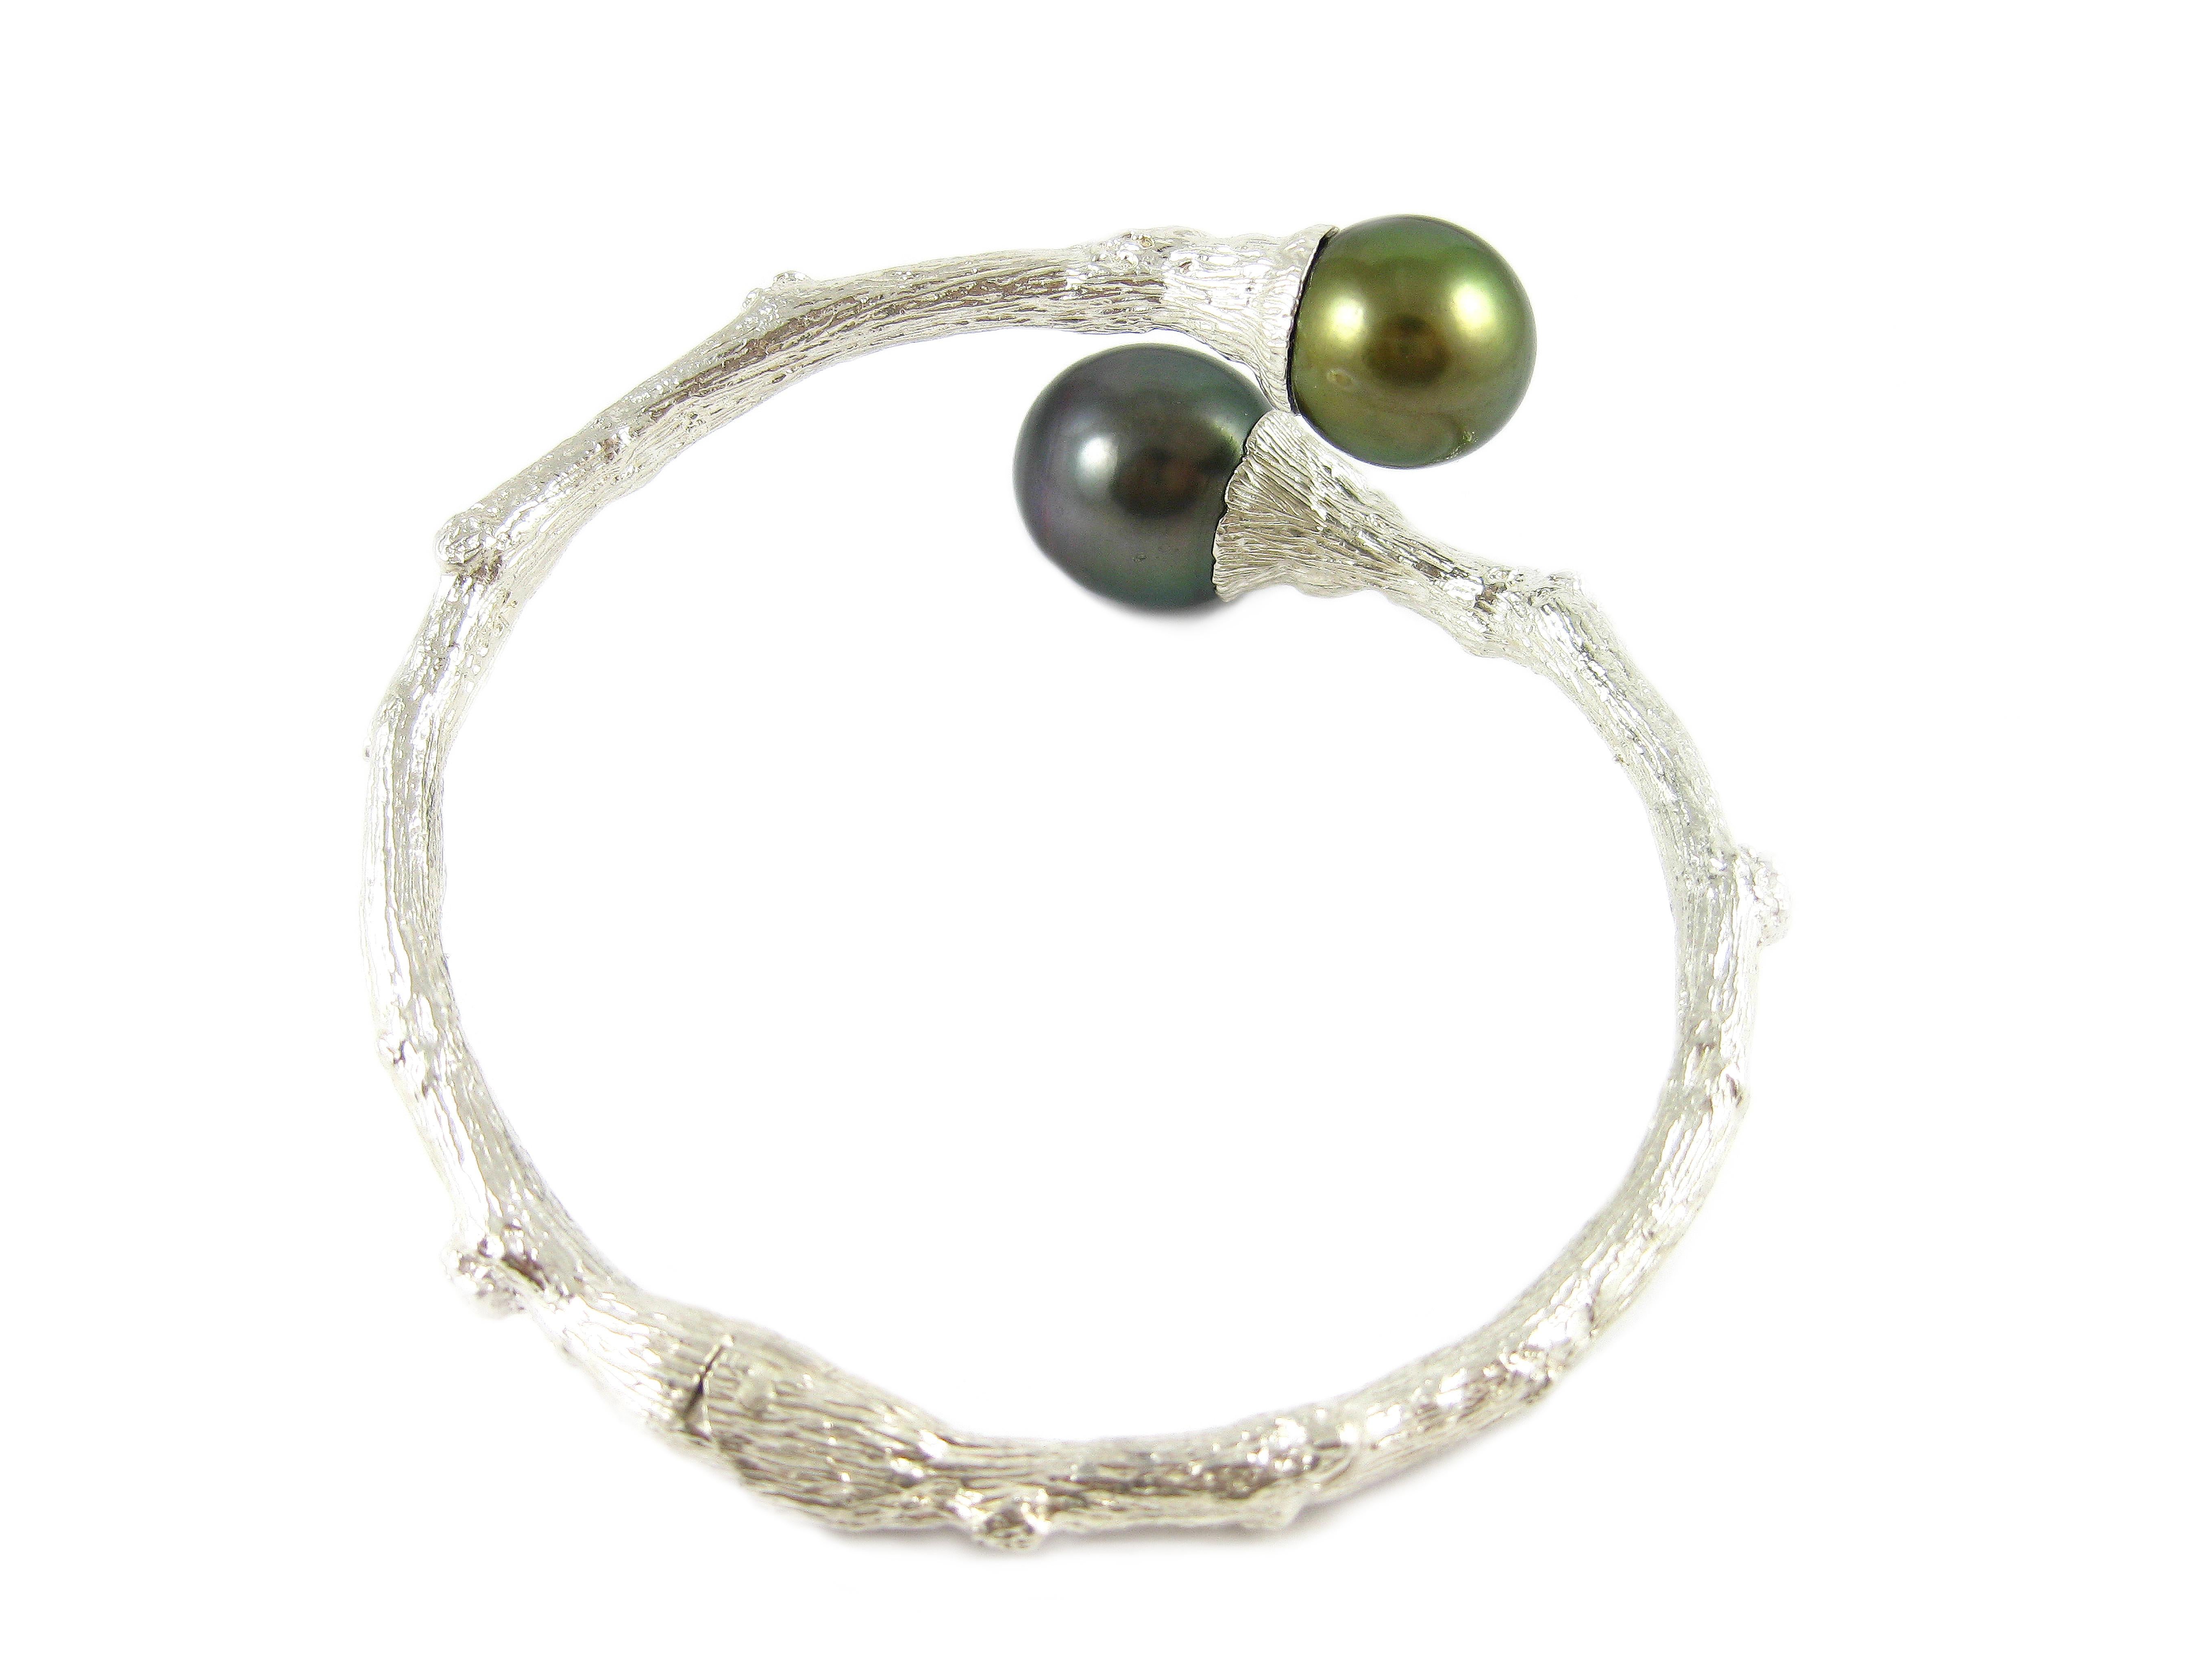 Channeling the eternal Tree of Life, the organic spirit of K. Brunini is captured through this delicate handcrafted Twig textured bracelet in sterling silver artfully capped with Tahitian pearls.

In the Twig Collection, nature exists alongside